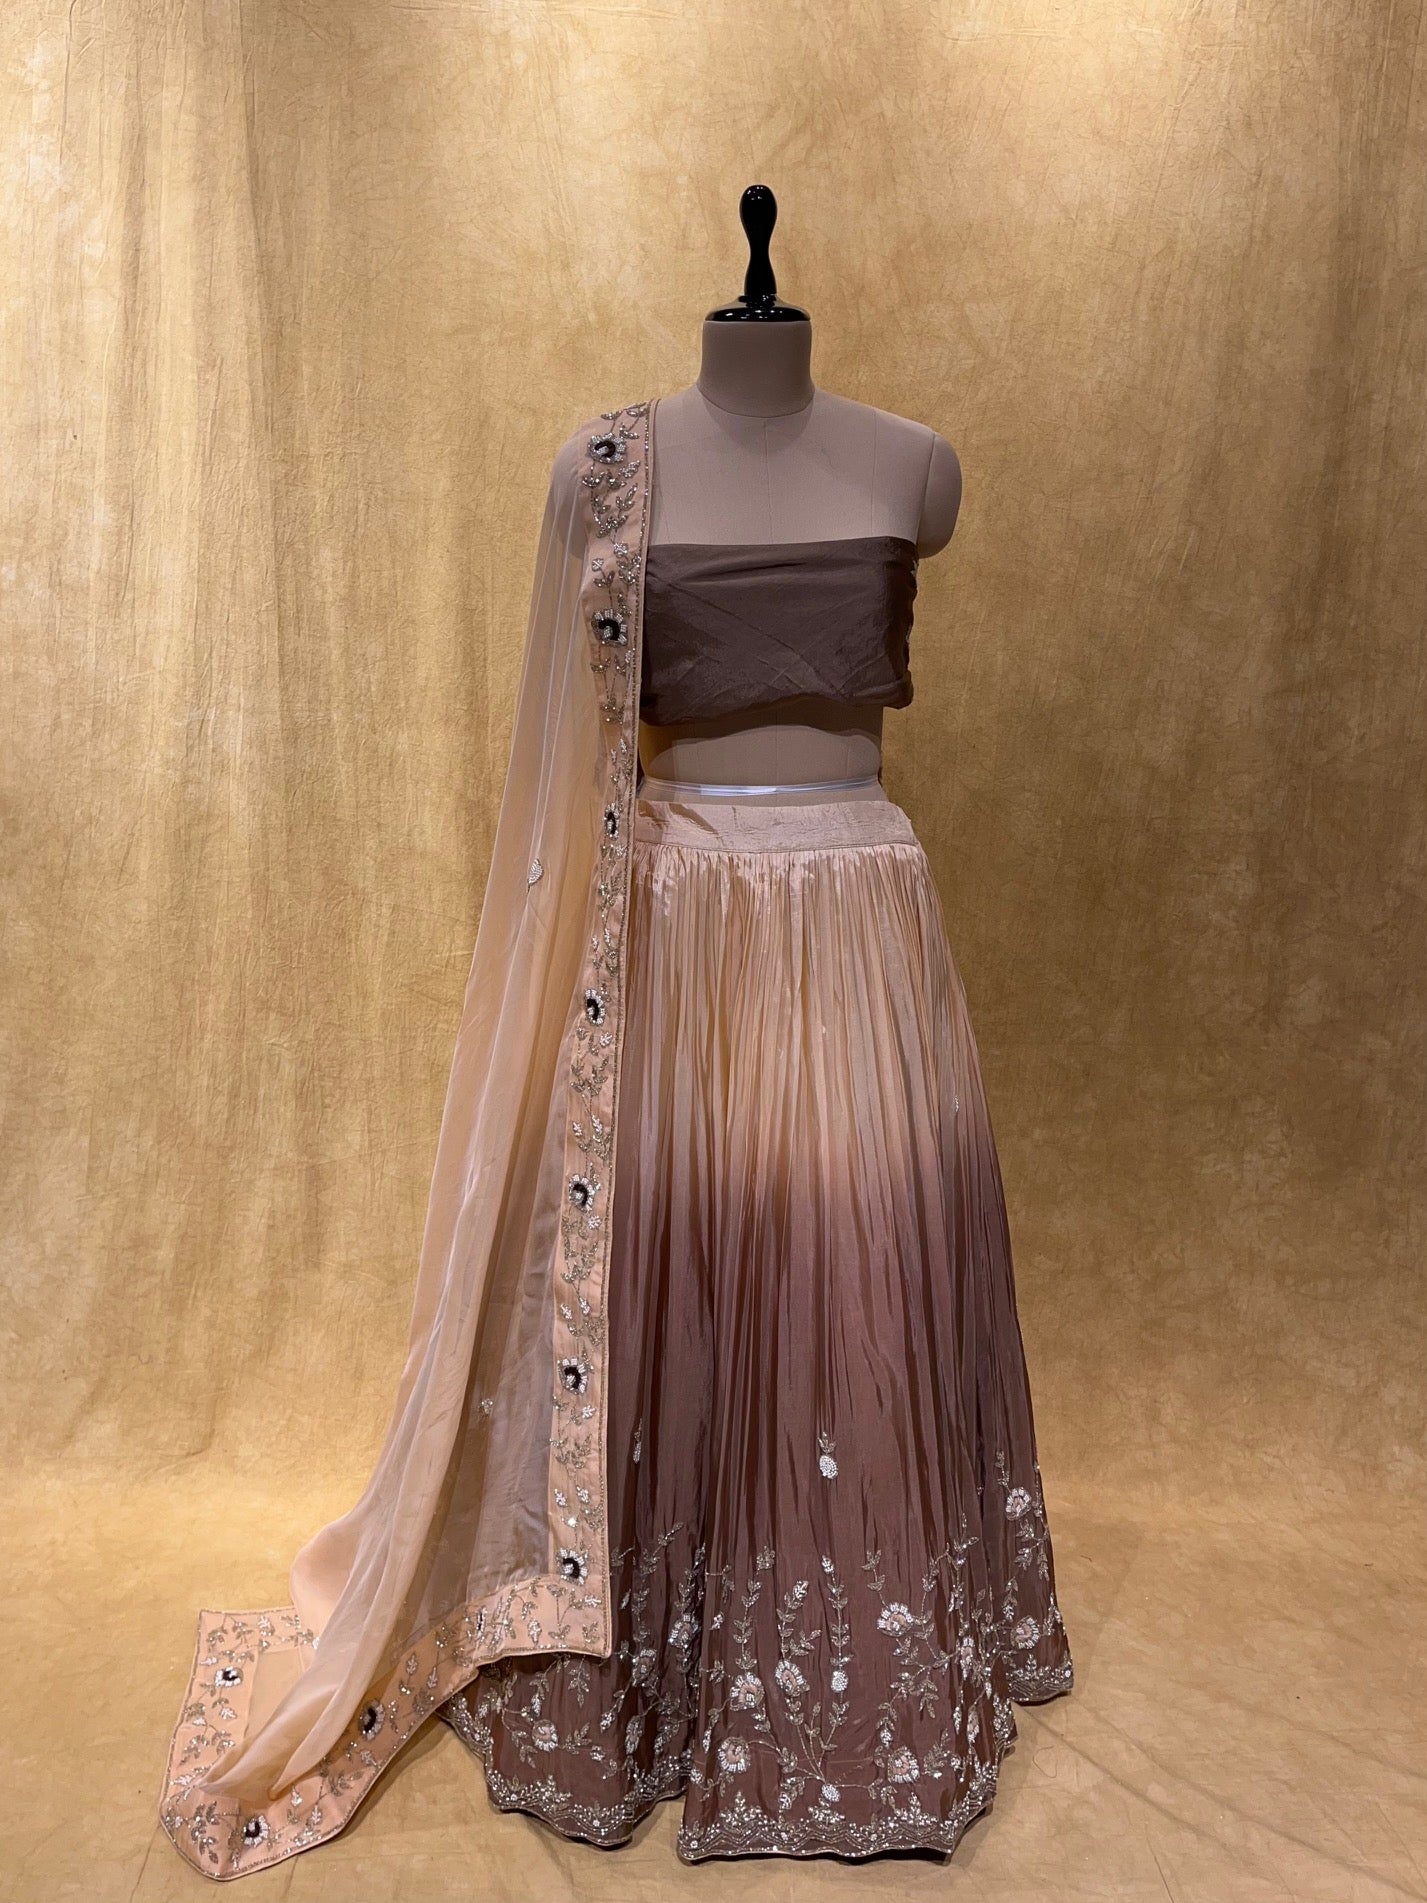 BRIDESMAIDS READYMADE BROWN COLOUR SHADED LEHENGA, UNSTITCHED BLOUSE WITH ORGANZA DUPATTA EMBELLISHED WITH CUTDANA WORK